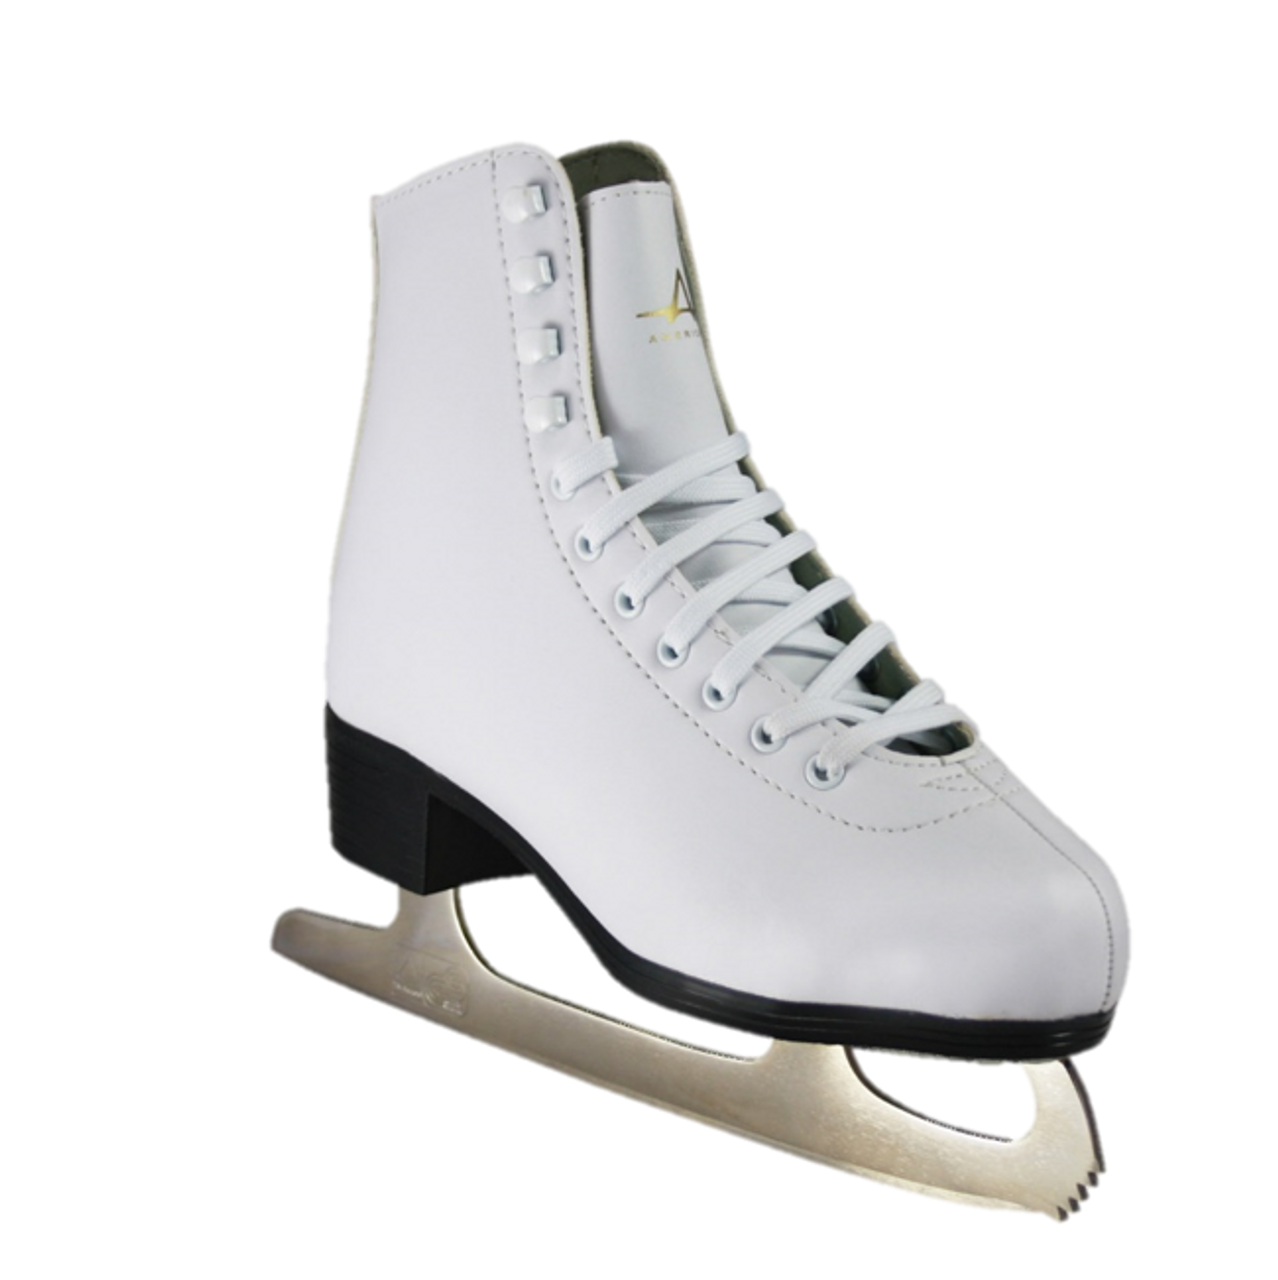 American Athletic Shoe Women&s Tricot Lined Ice Skates 8 White